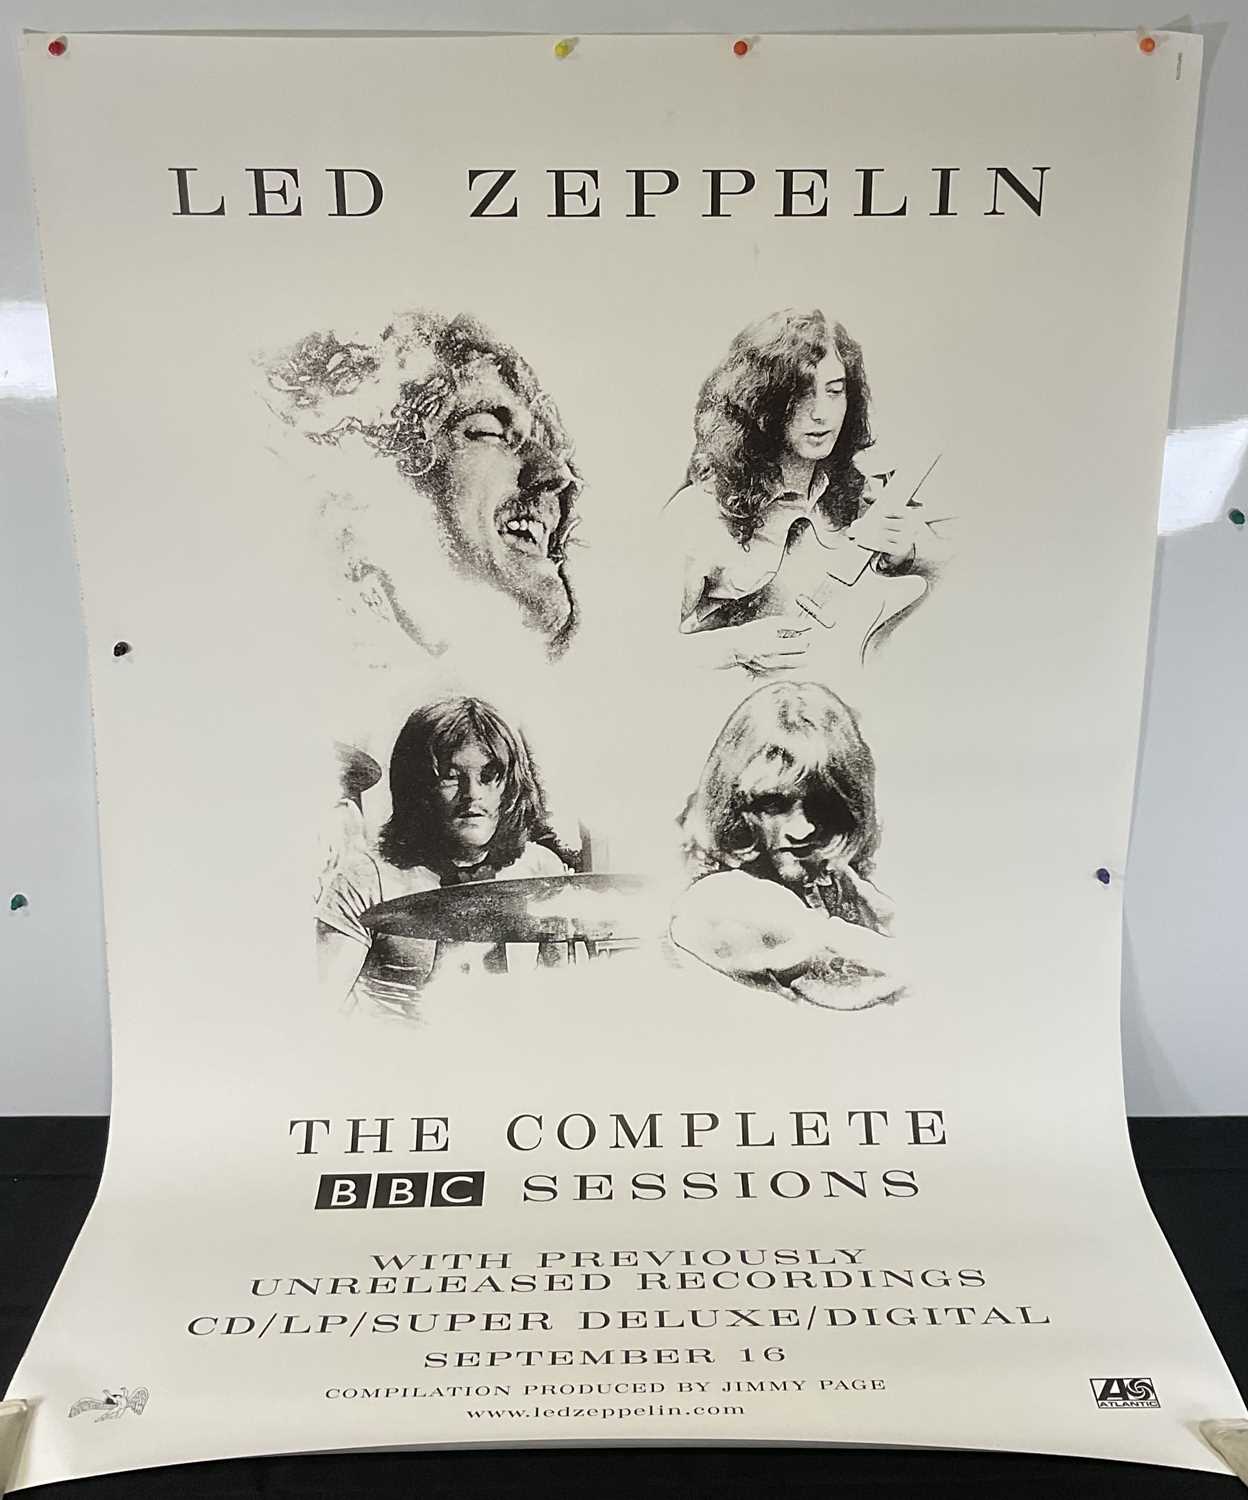 LED ZEPPELIN - The Complete BBC Sessions Album Bus Stop promotional poster - rolled